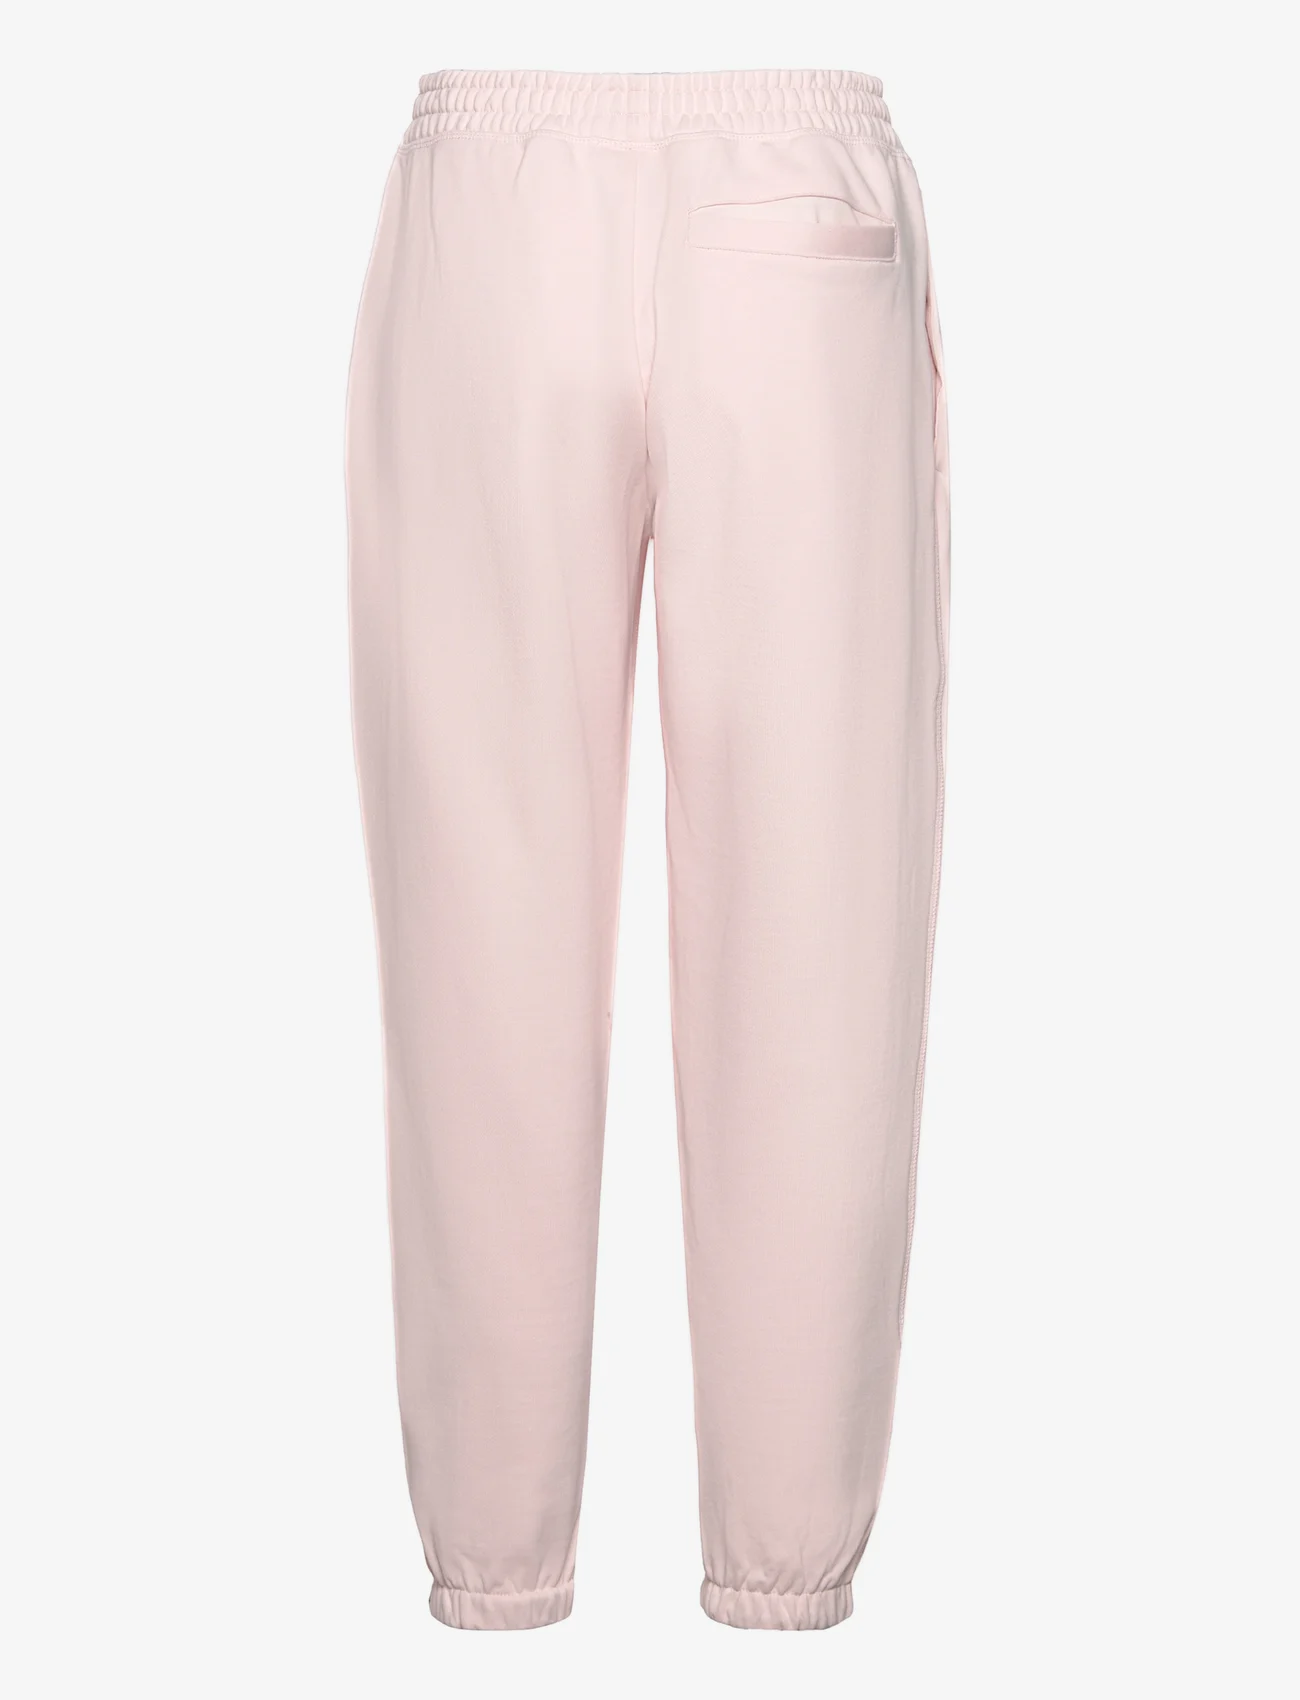 New Balance - Athletics Nature State French Terry Sweatpant - women - washed pink - 1